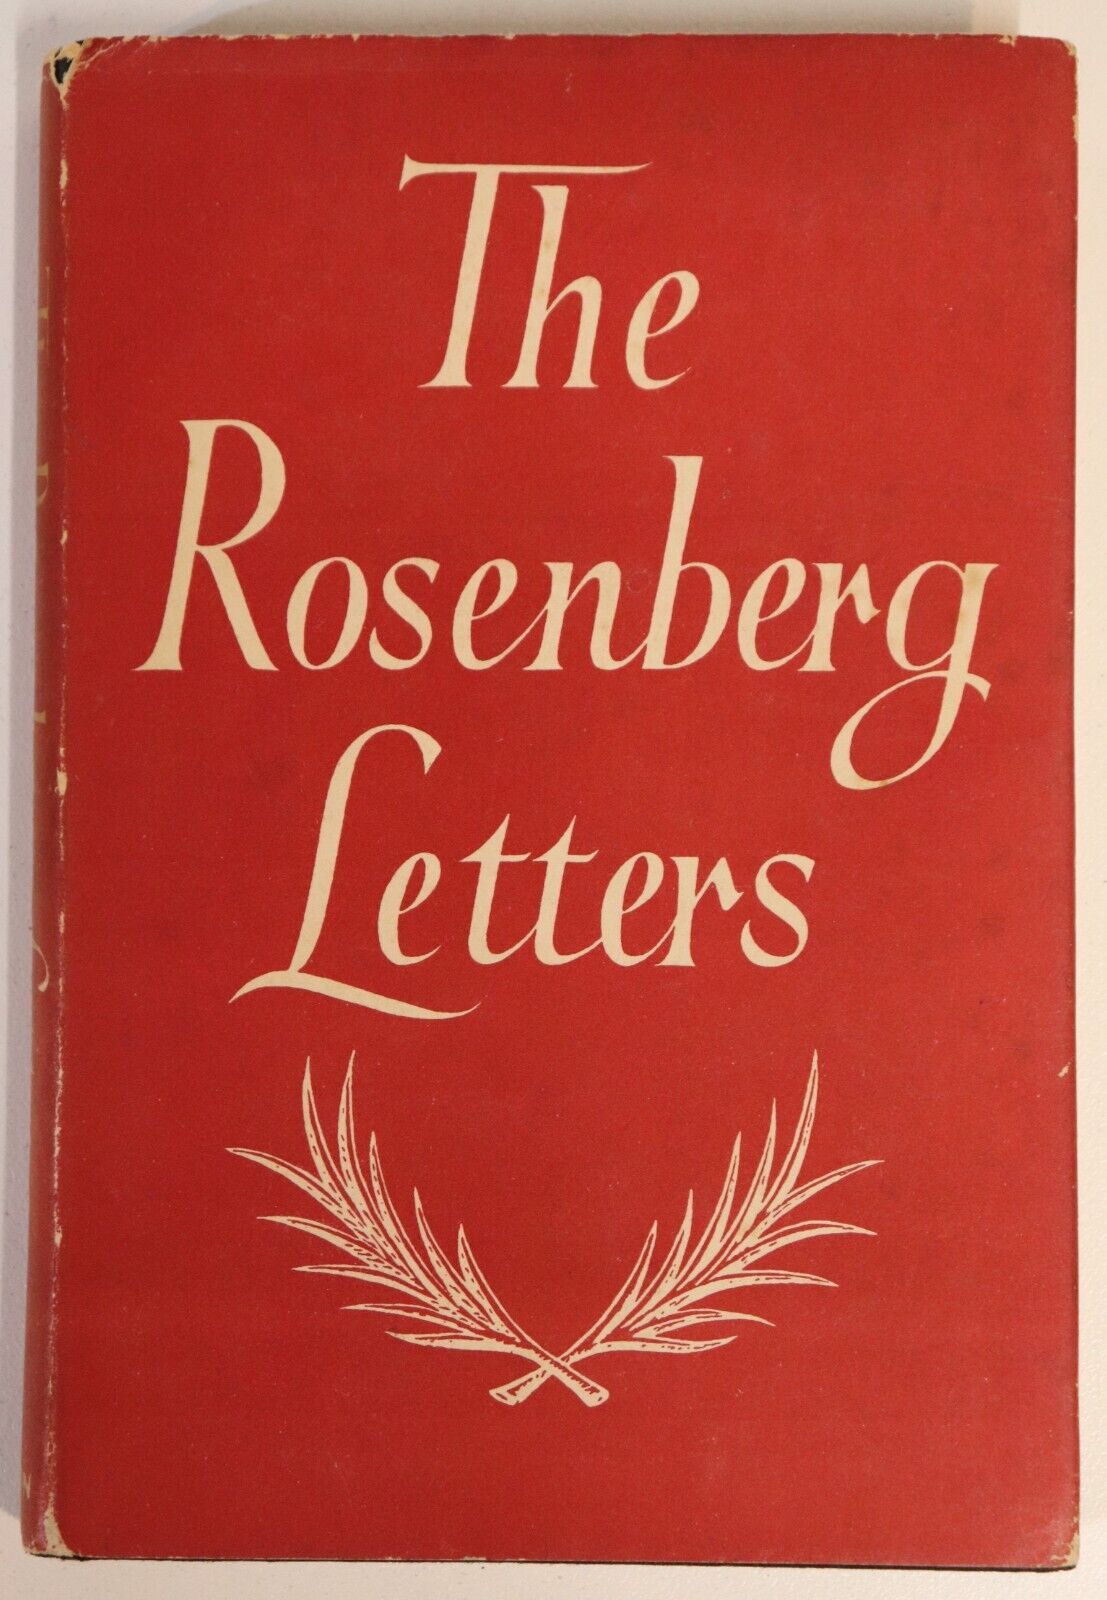 The Rosenberg Letters - 1953 - American History Book